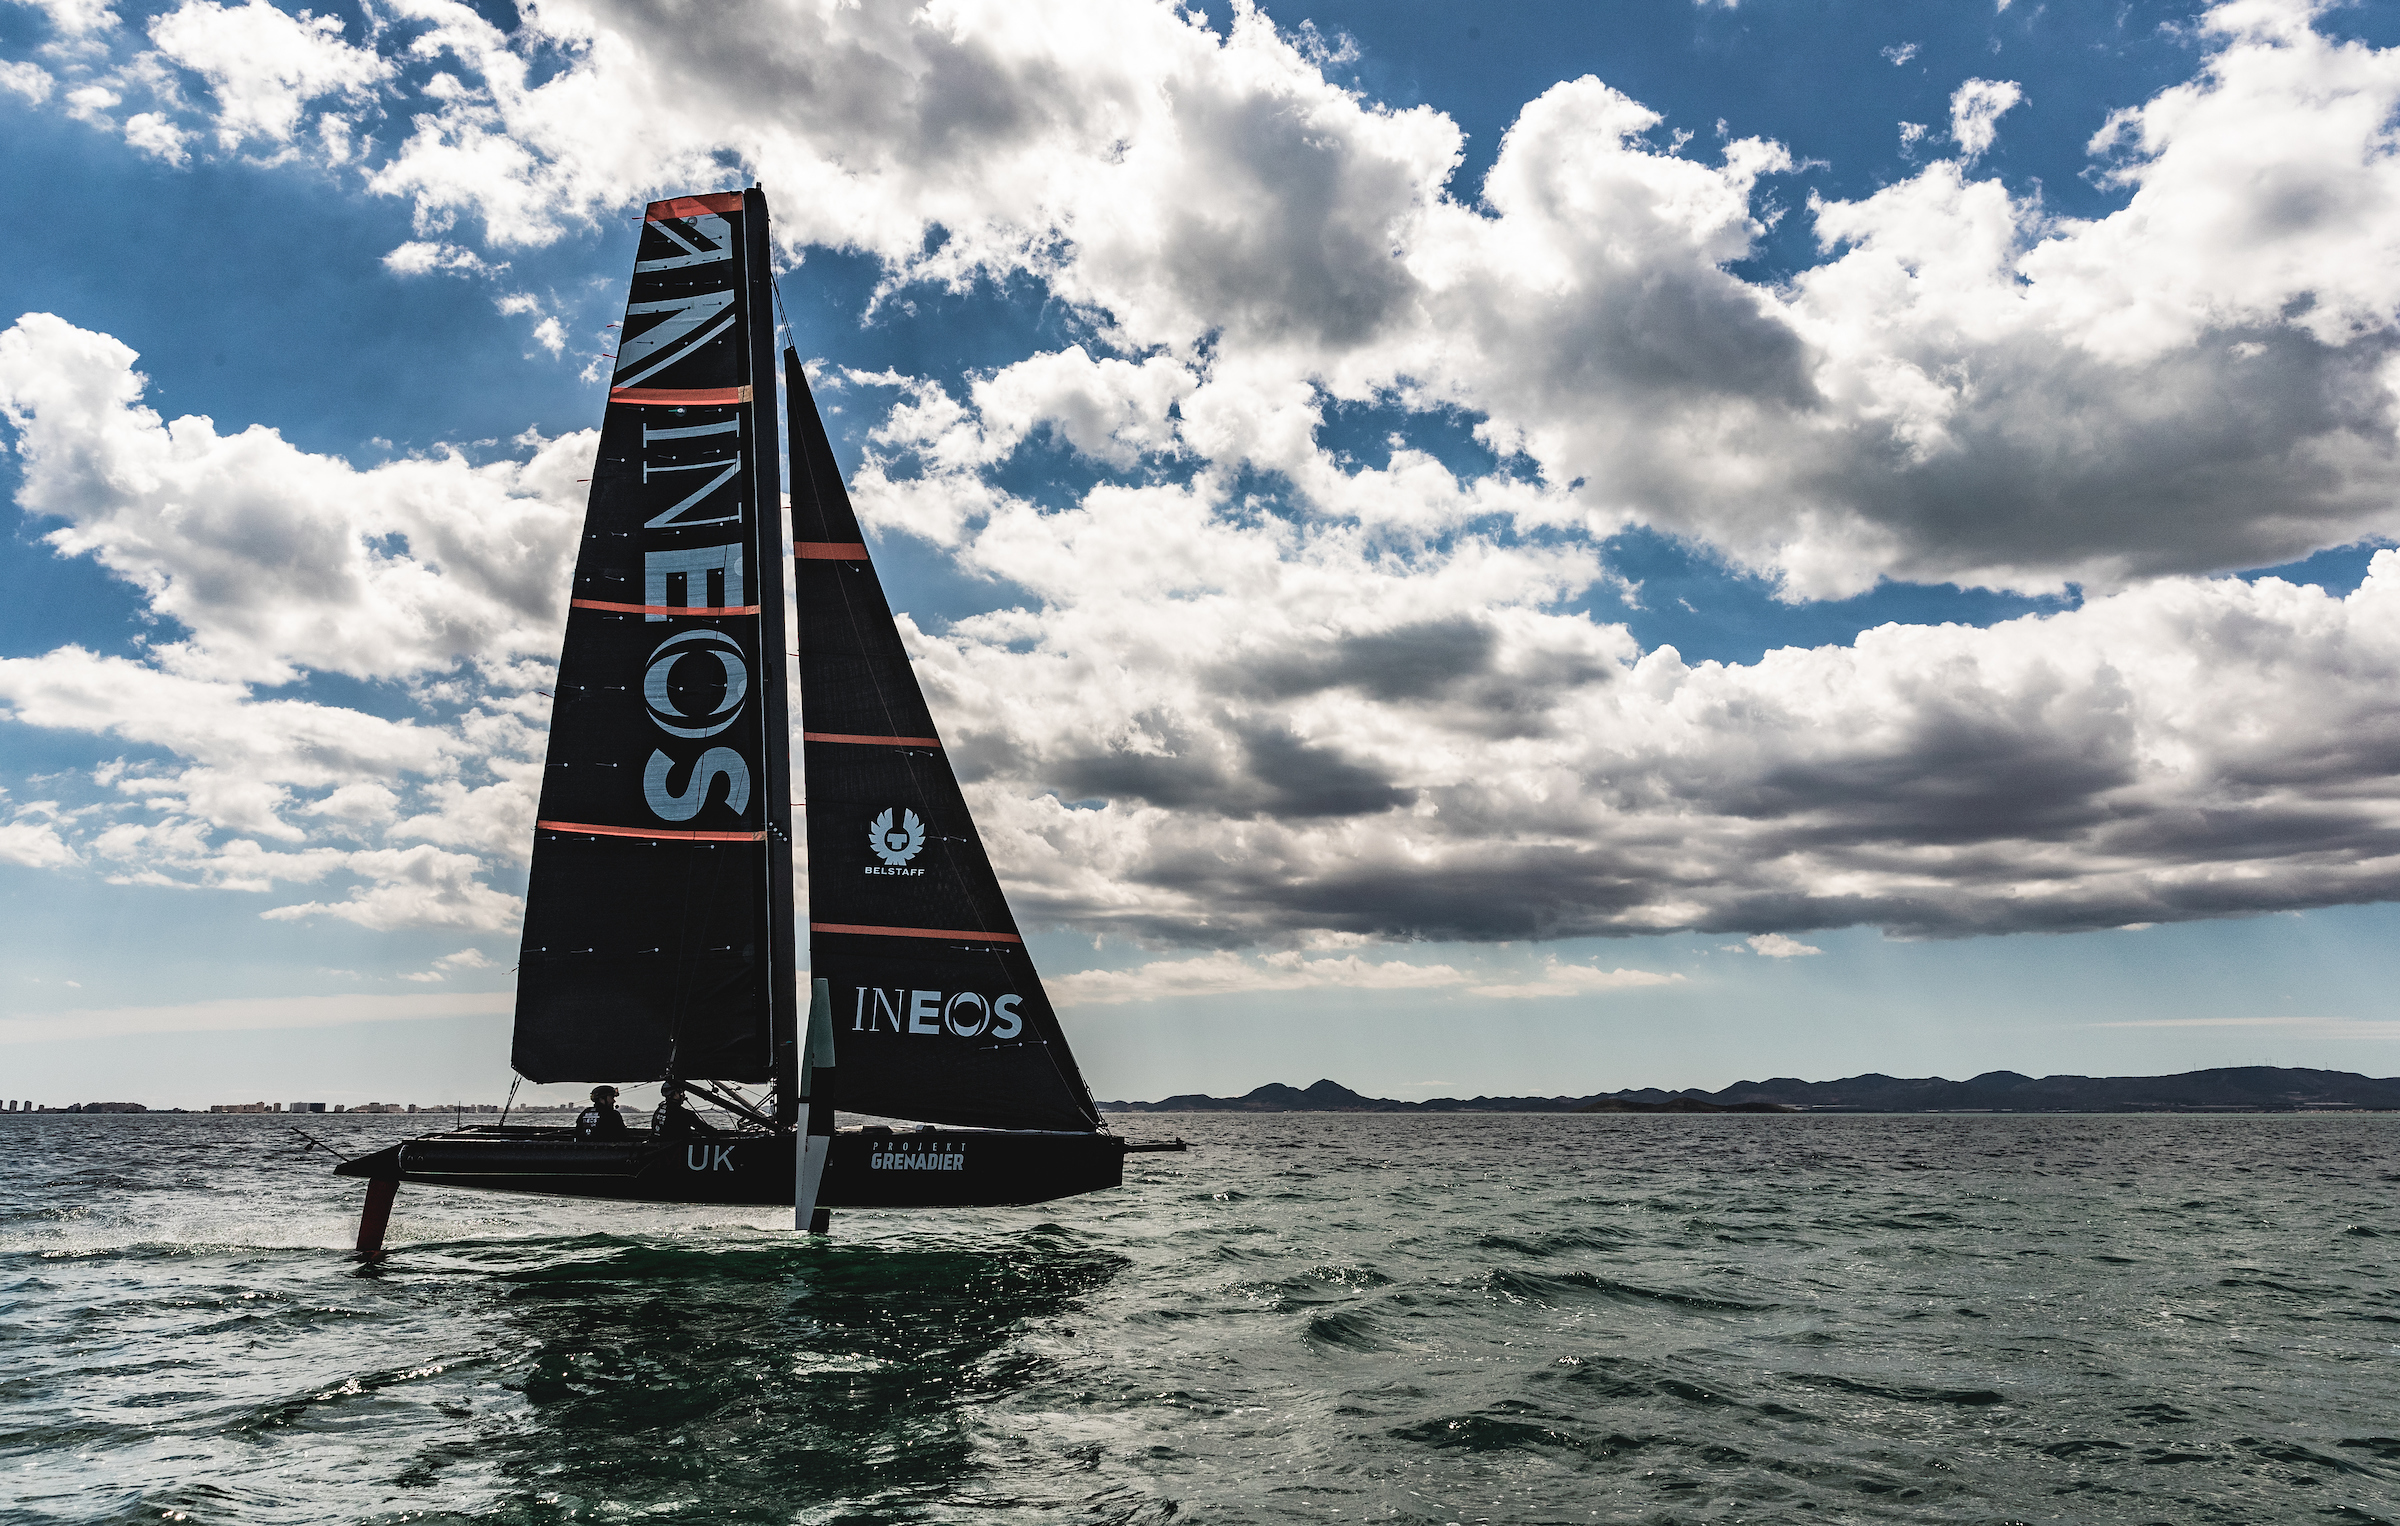 ELG Carbon Fibre and British sailing team INEOS Team UK has joined forces to provide sustainable materials and practices for the AC75 boat.